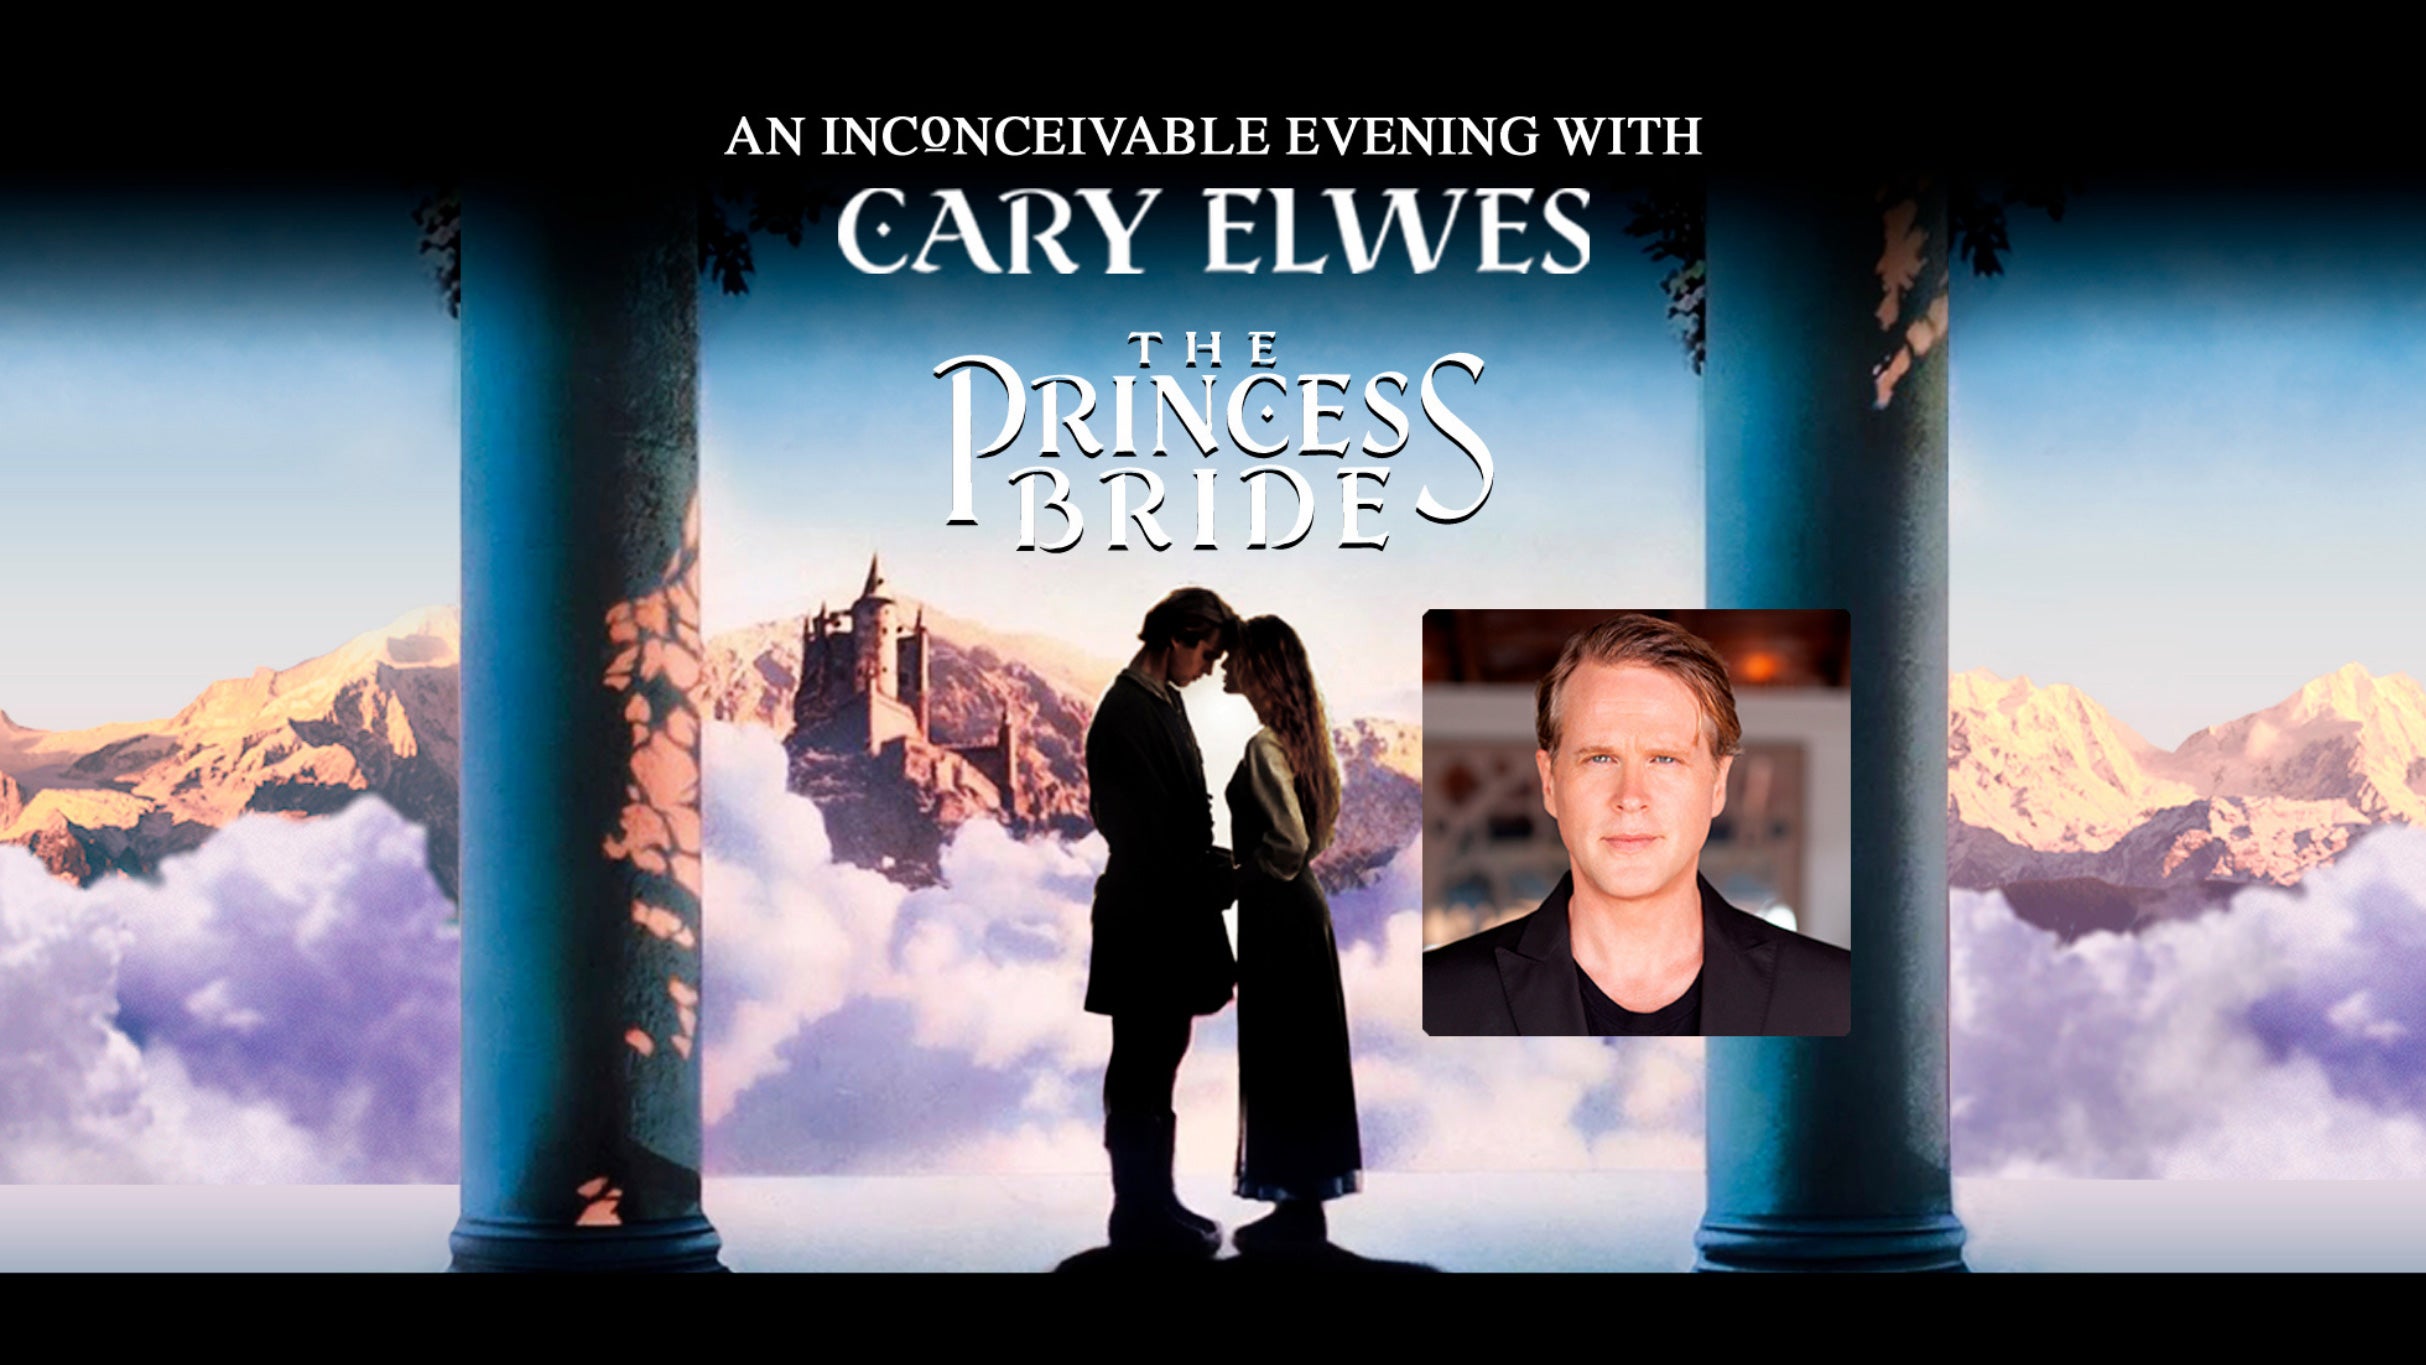 The Princess Bride: An Inconceivable Evening with Cary Elwes in Waukegan promo photo for Official Platinum Onsale presale offer code